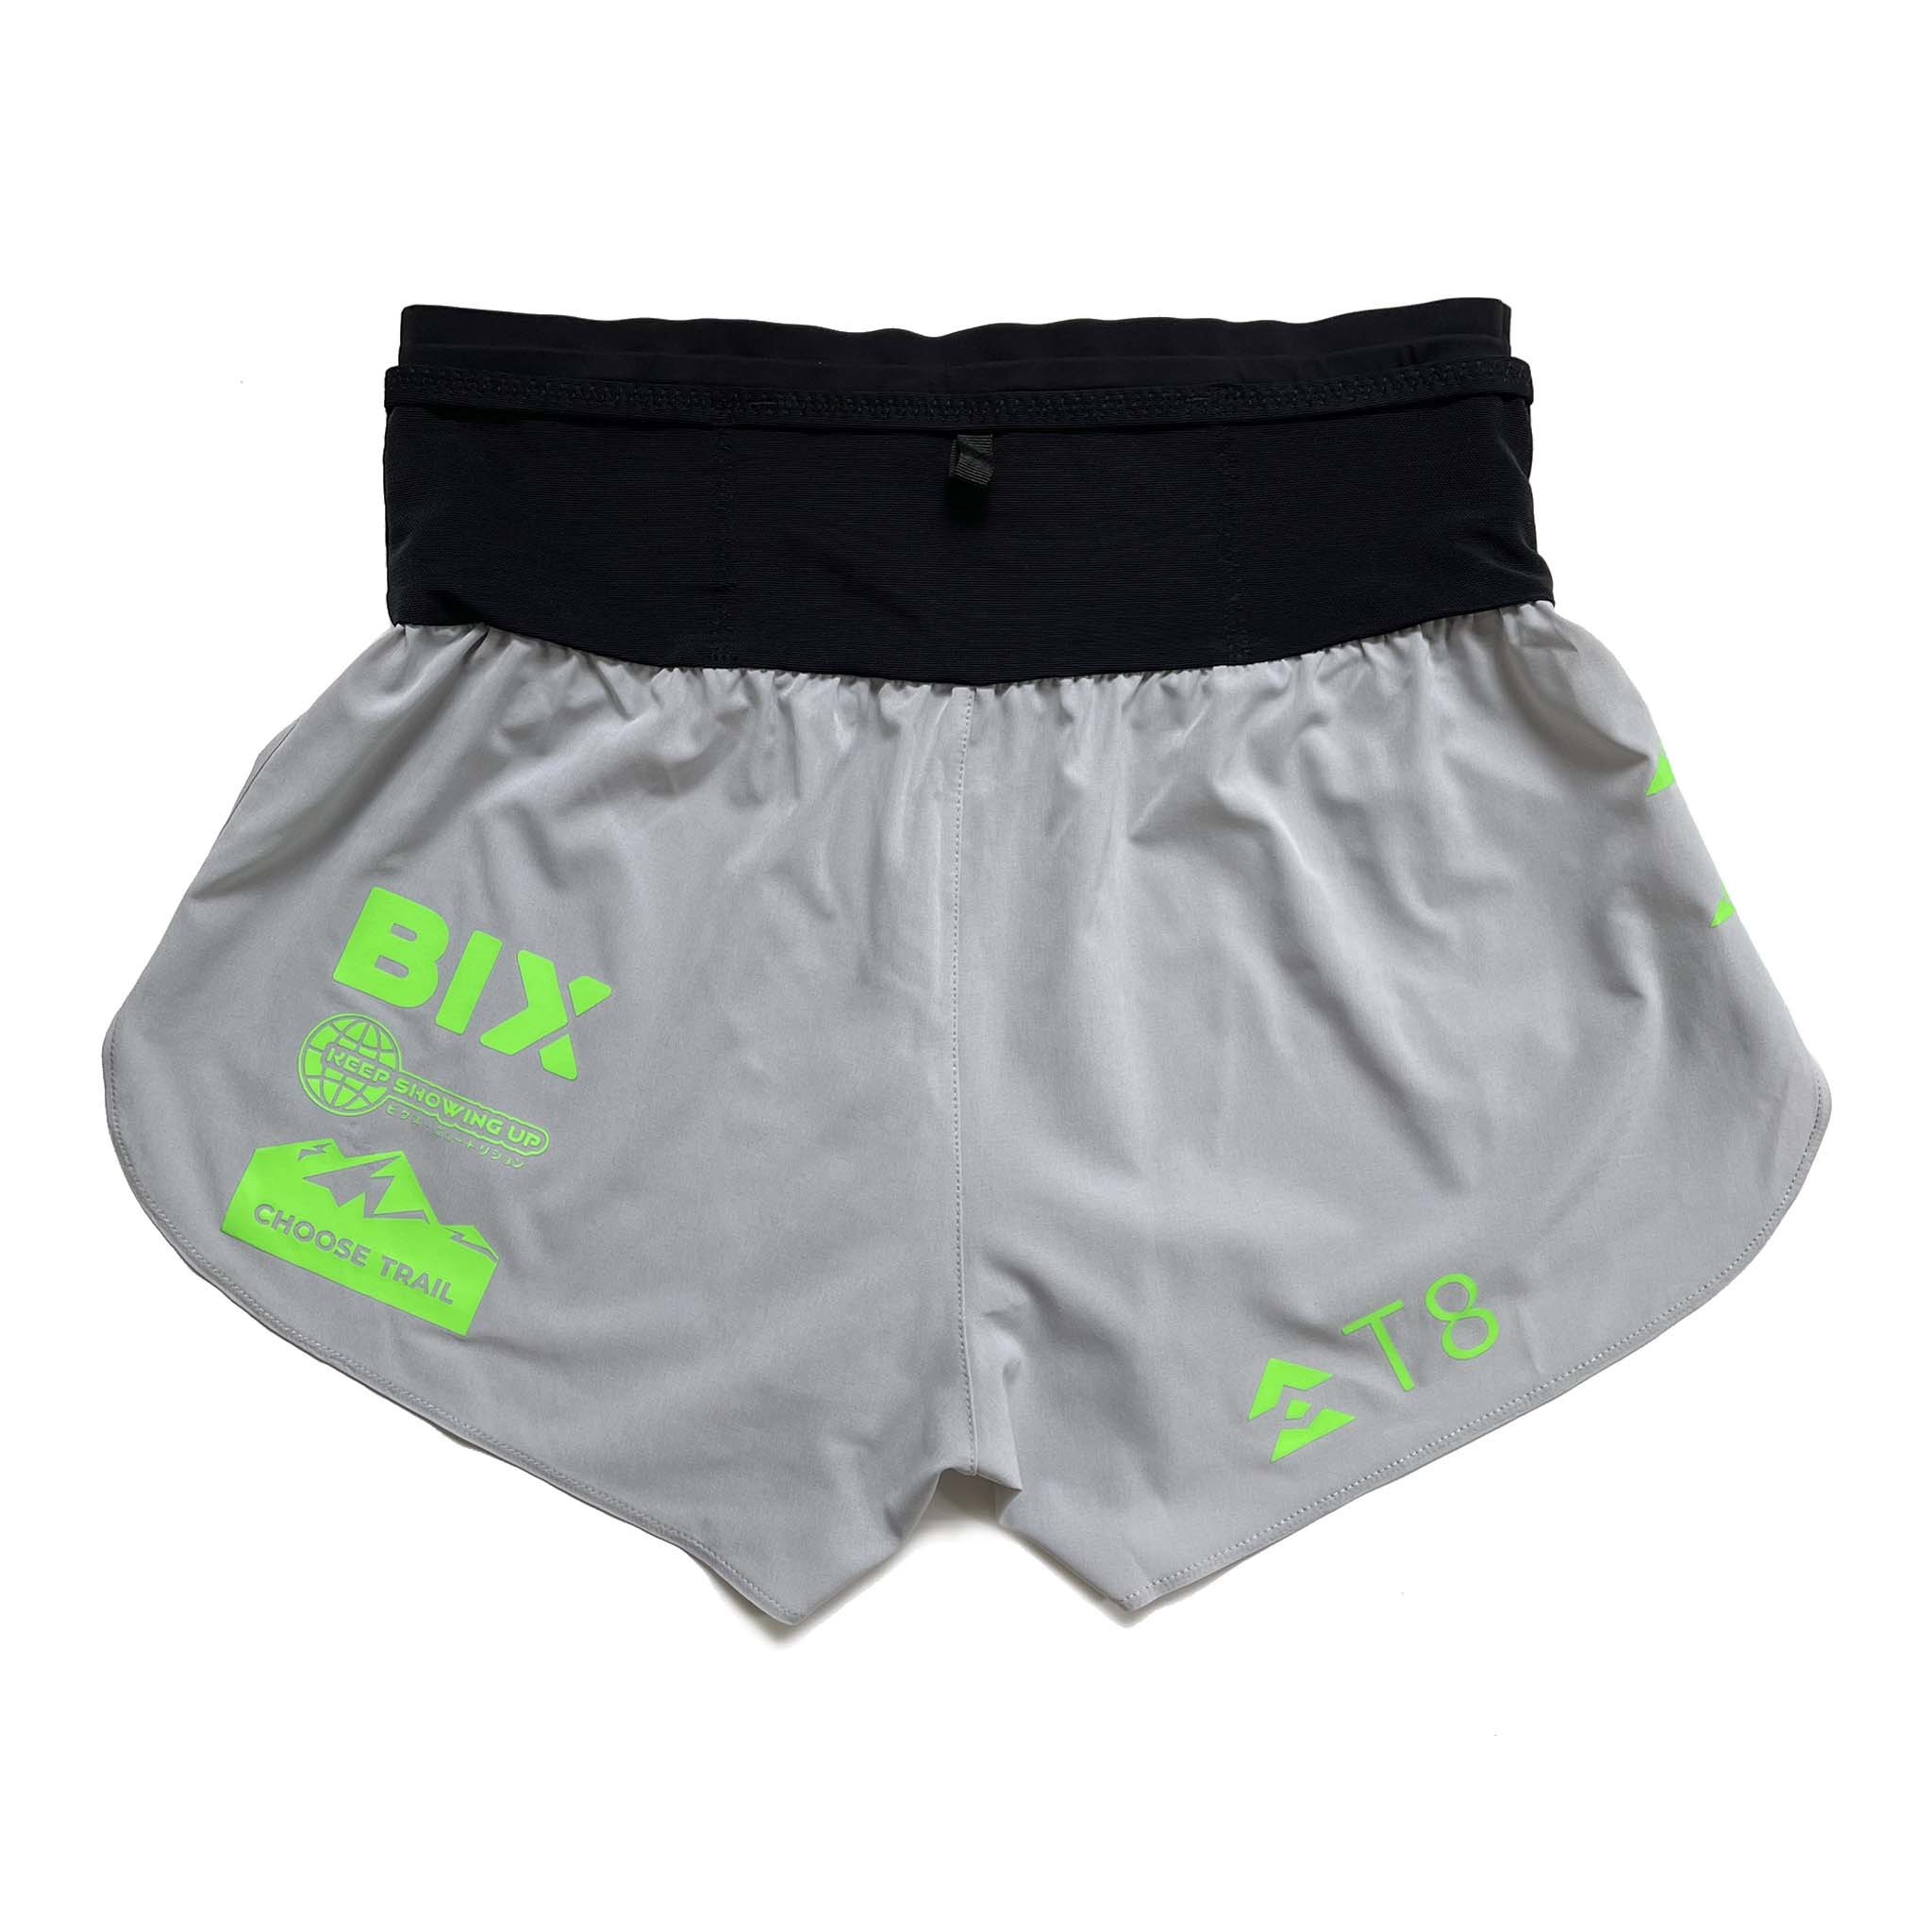 How to Choose Running Shorts